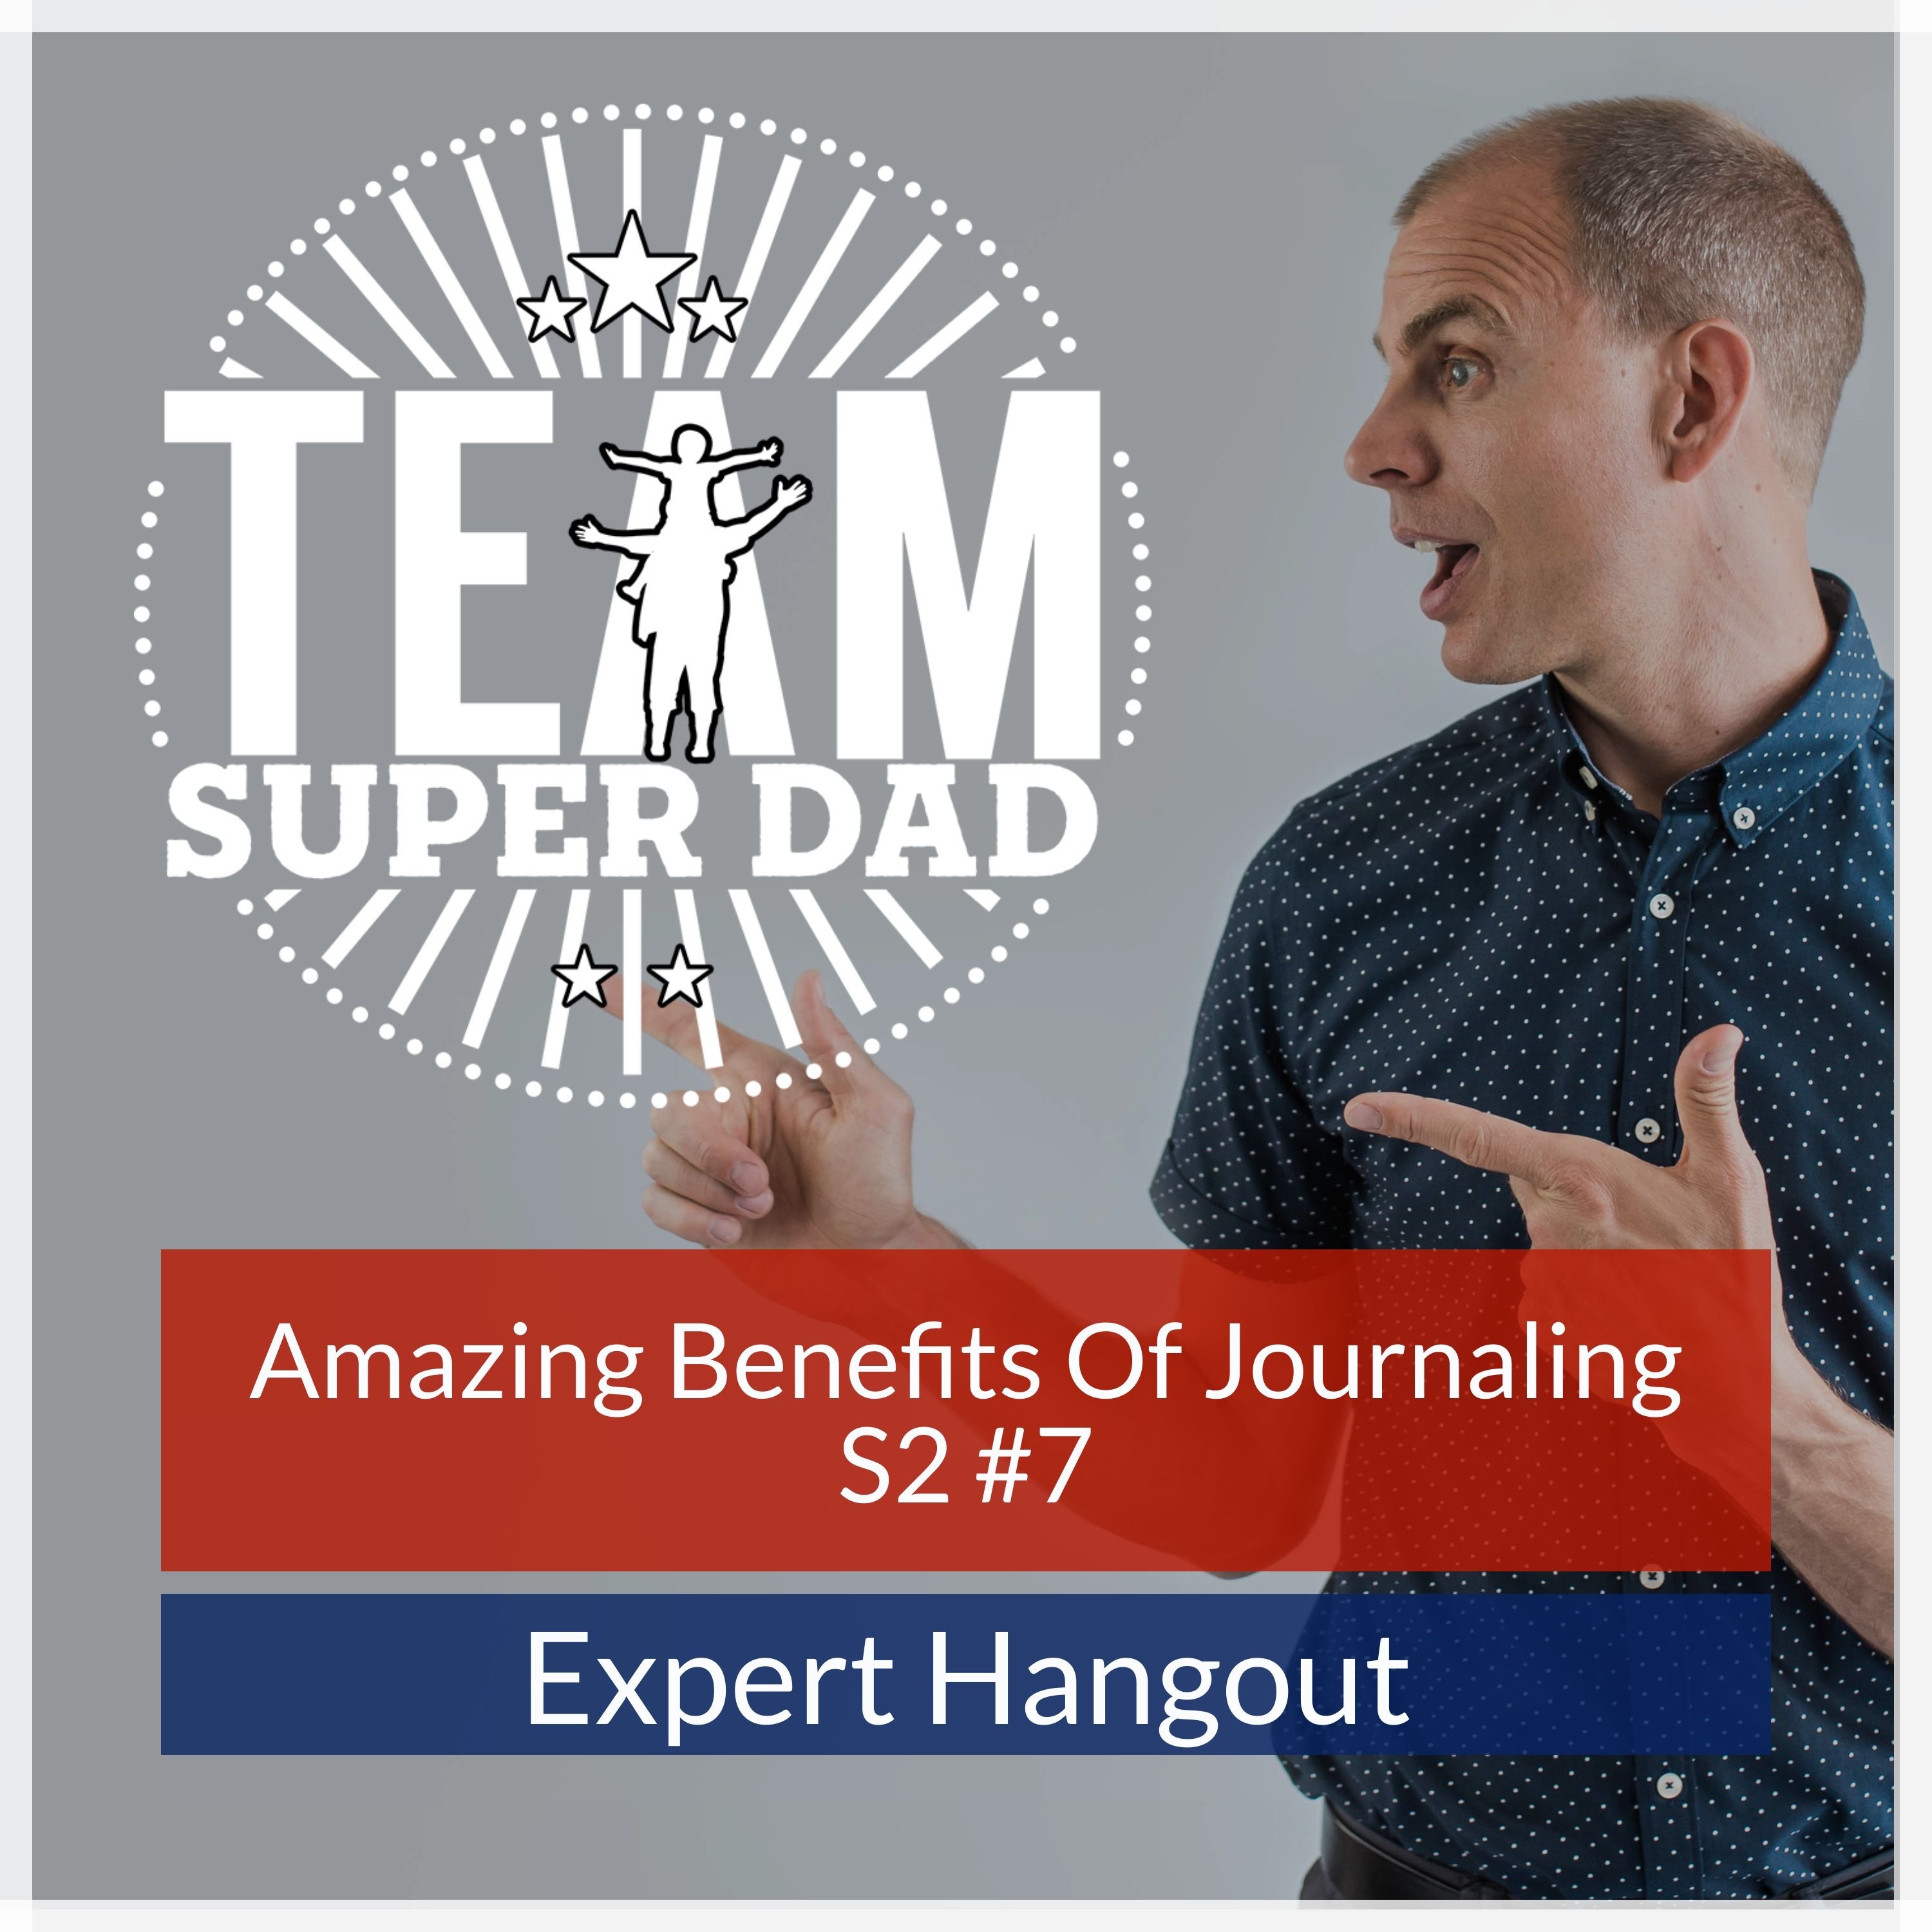 The Amazing Benefits of Journaling - Expert Hangout Podcast